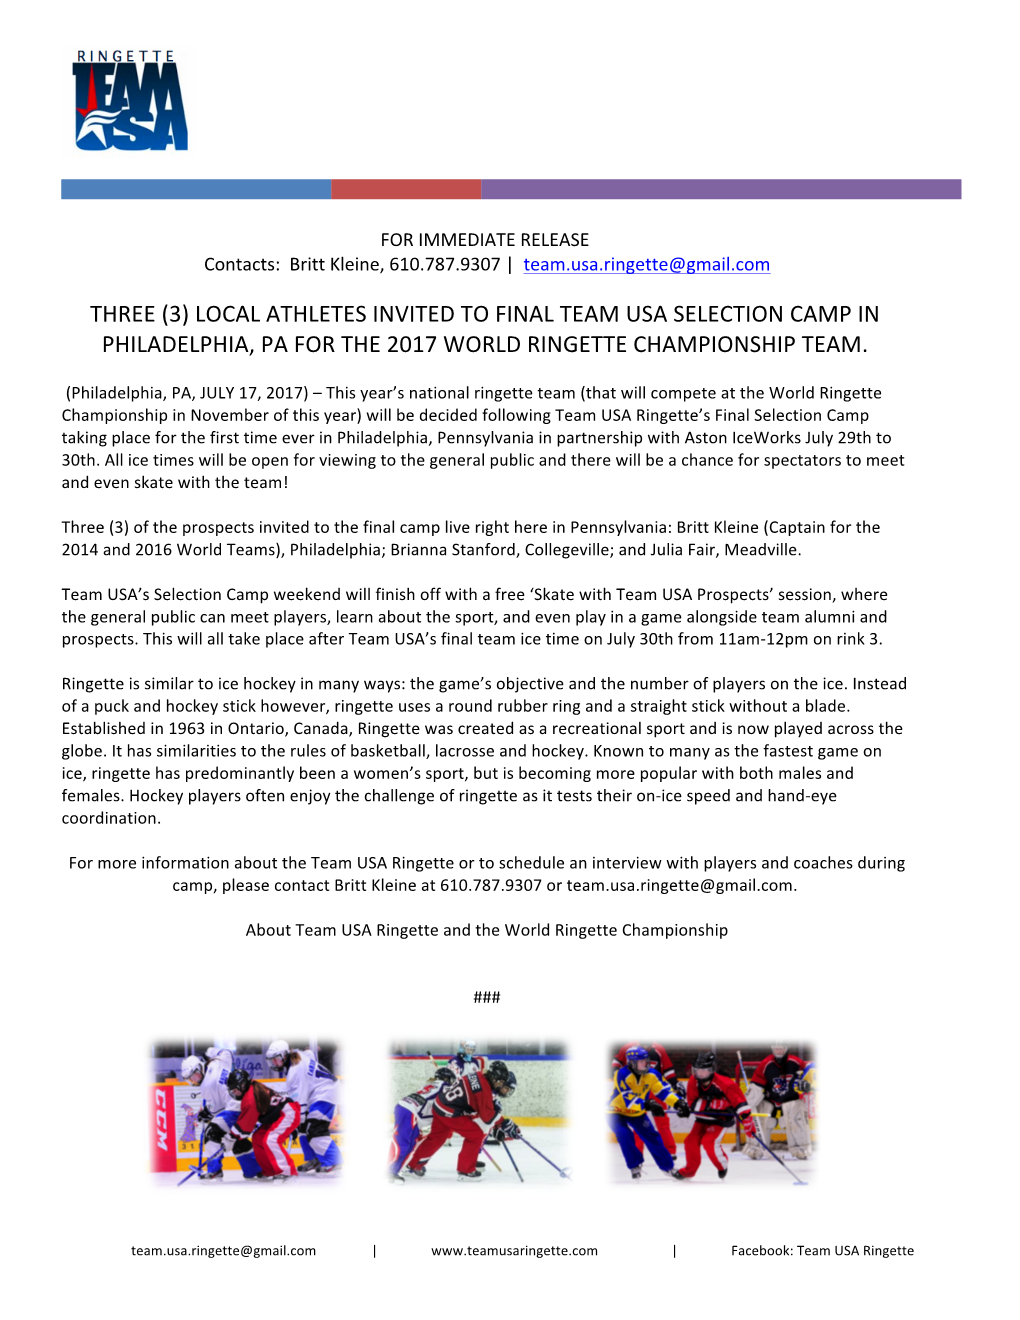 Local Athletes Invited to Final Team Usa Selection Camp in Philadelphia, Pa for the 2017 World Ringette Championship Team